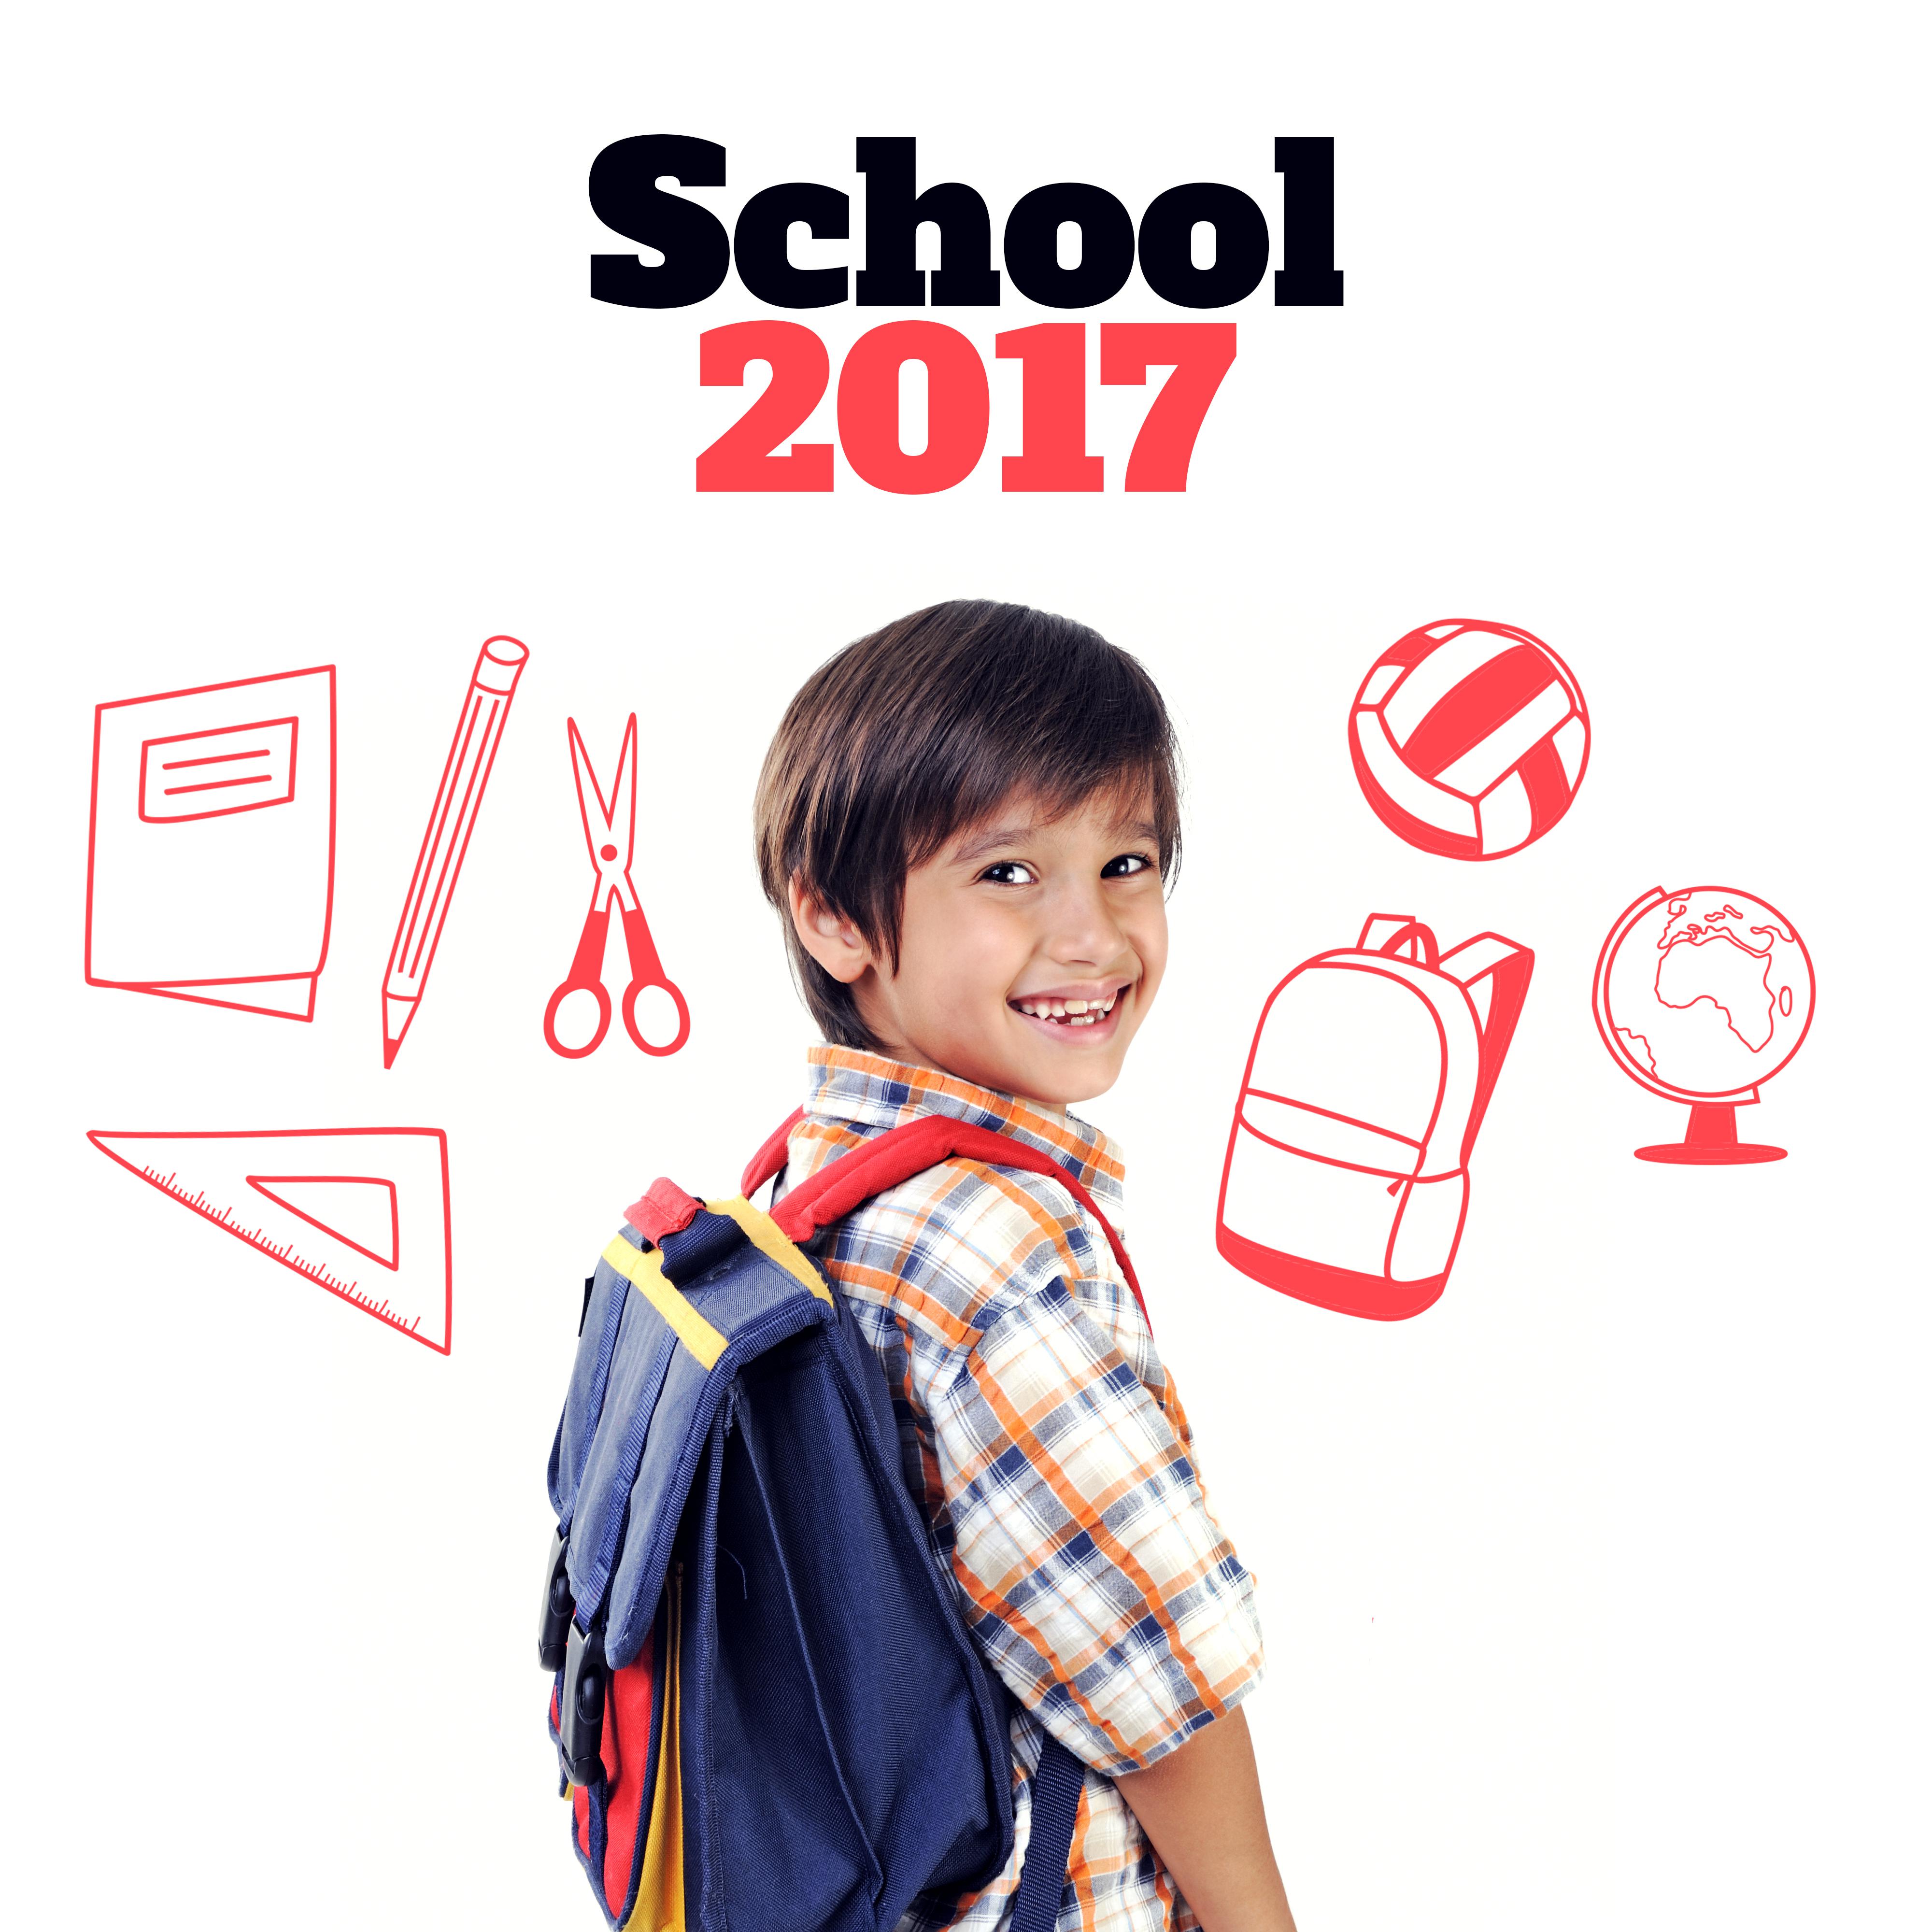 School 2017 – Chill Out Music, Have a Break , Party Hits, Relax